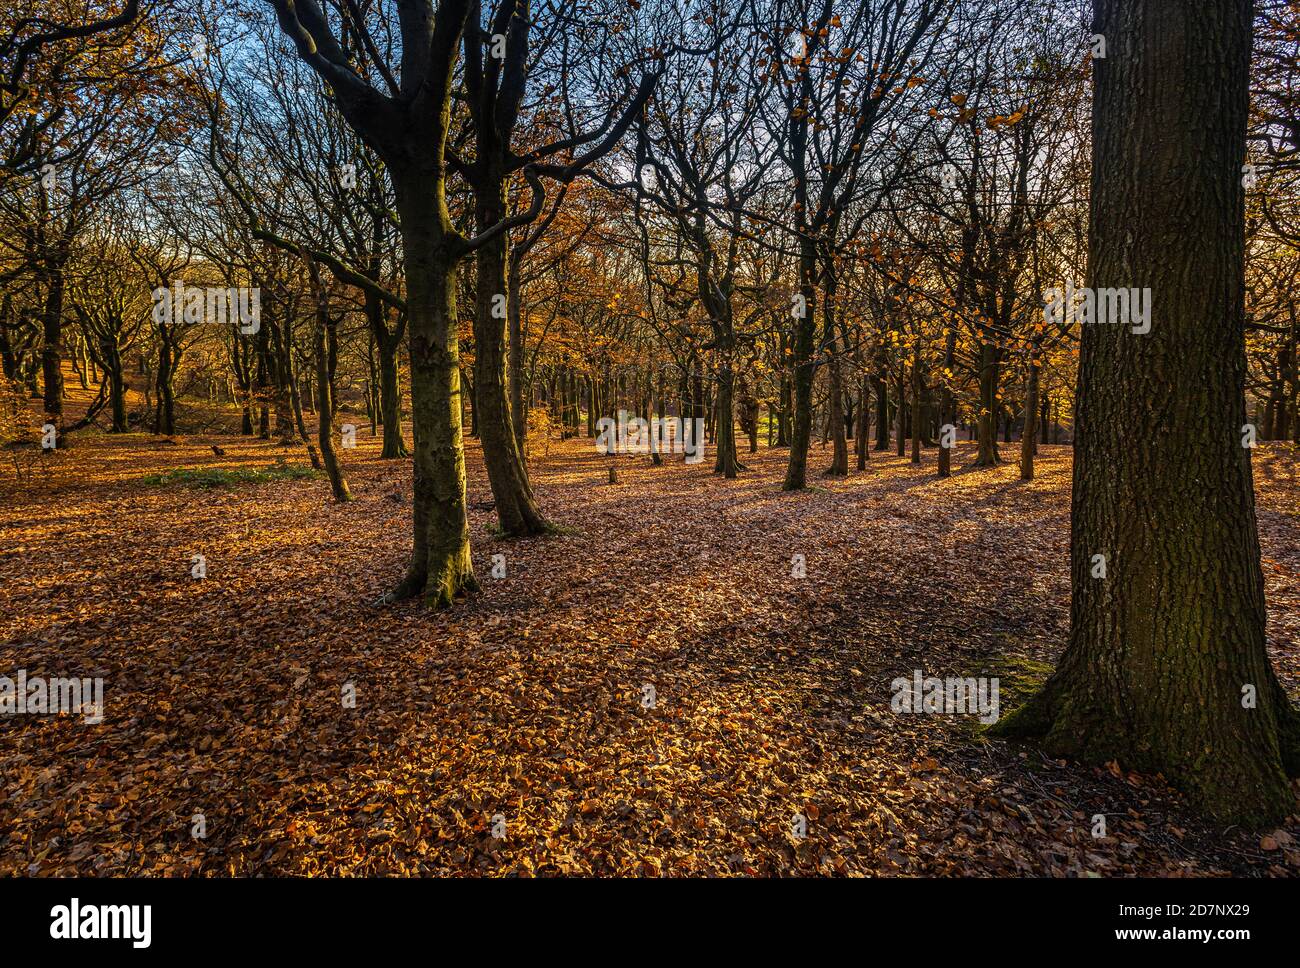 Beech trees and carpet of fallen autumn leaves in October at Tandle Hill Woods, Oldham, Greater Manchester Stock Photo